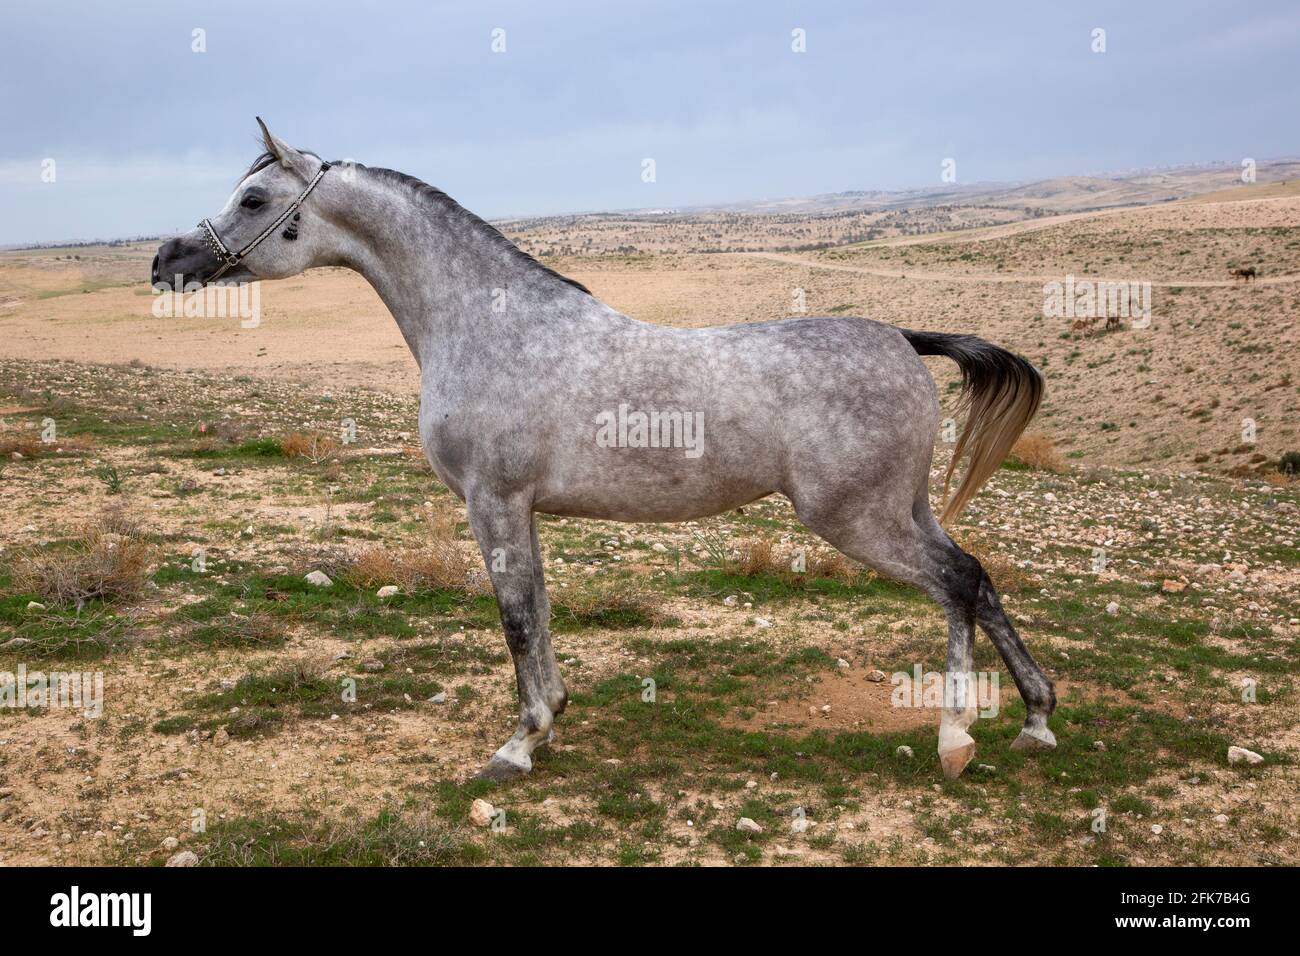 The Arabian or Arab horse is a breed of horse that originated on the Arabian Peninsula. With a distinctive head shape and high tail carriage, The Arab Stock Photo